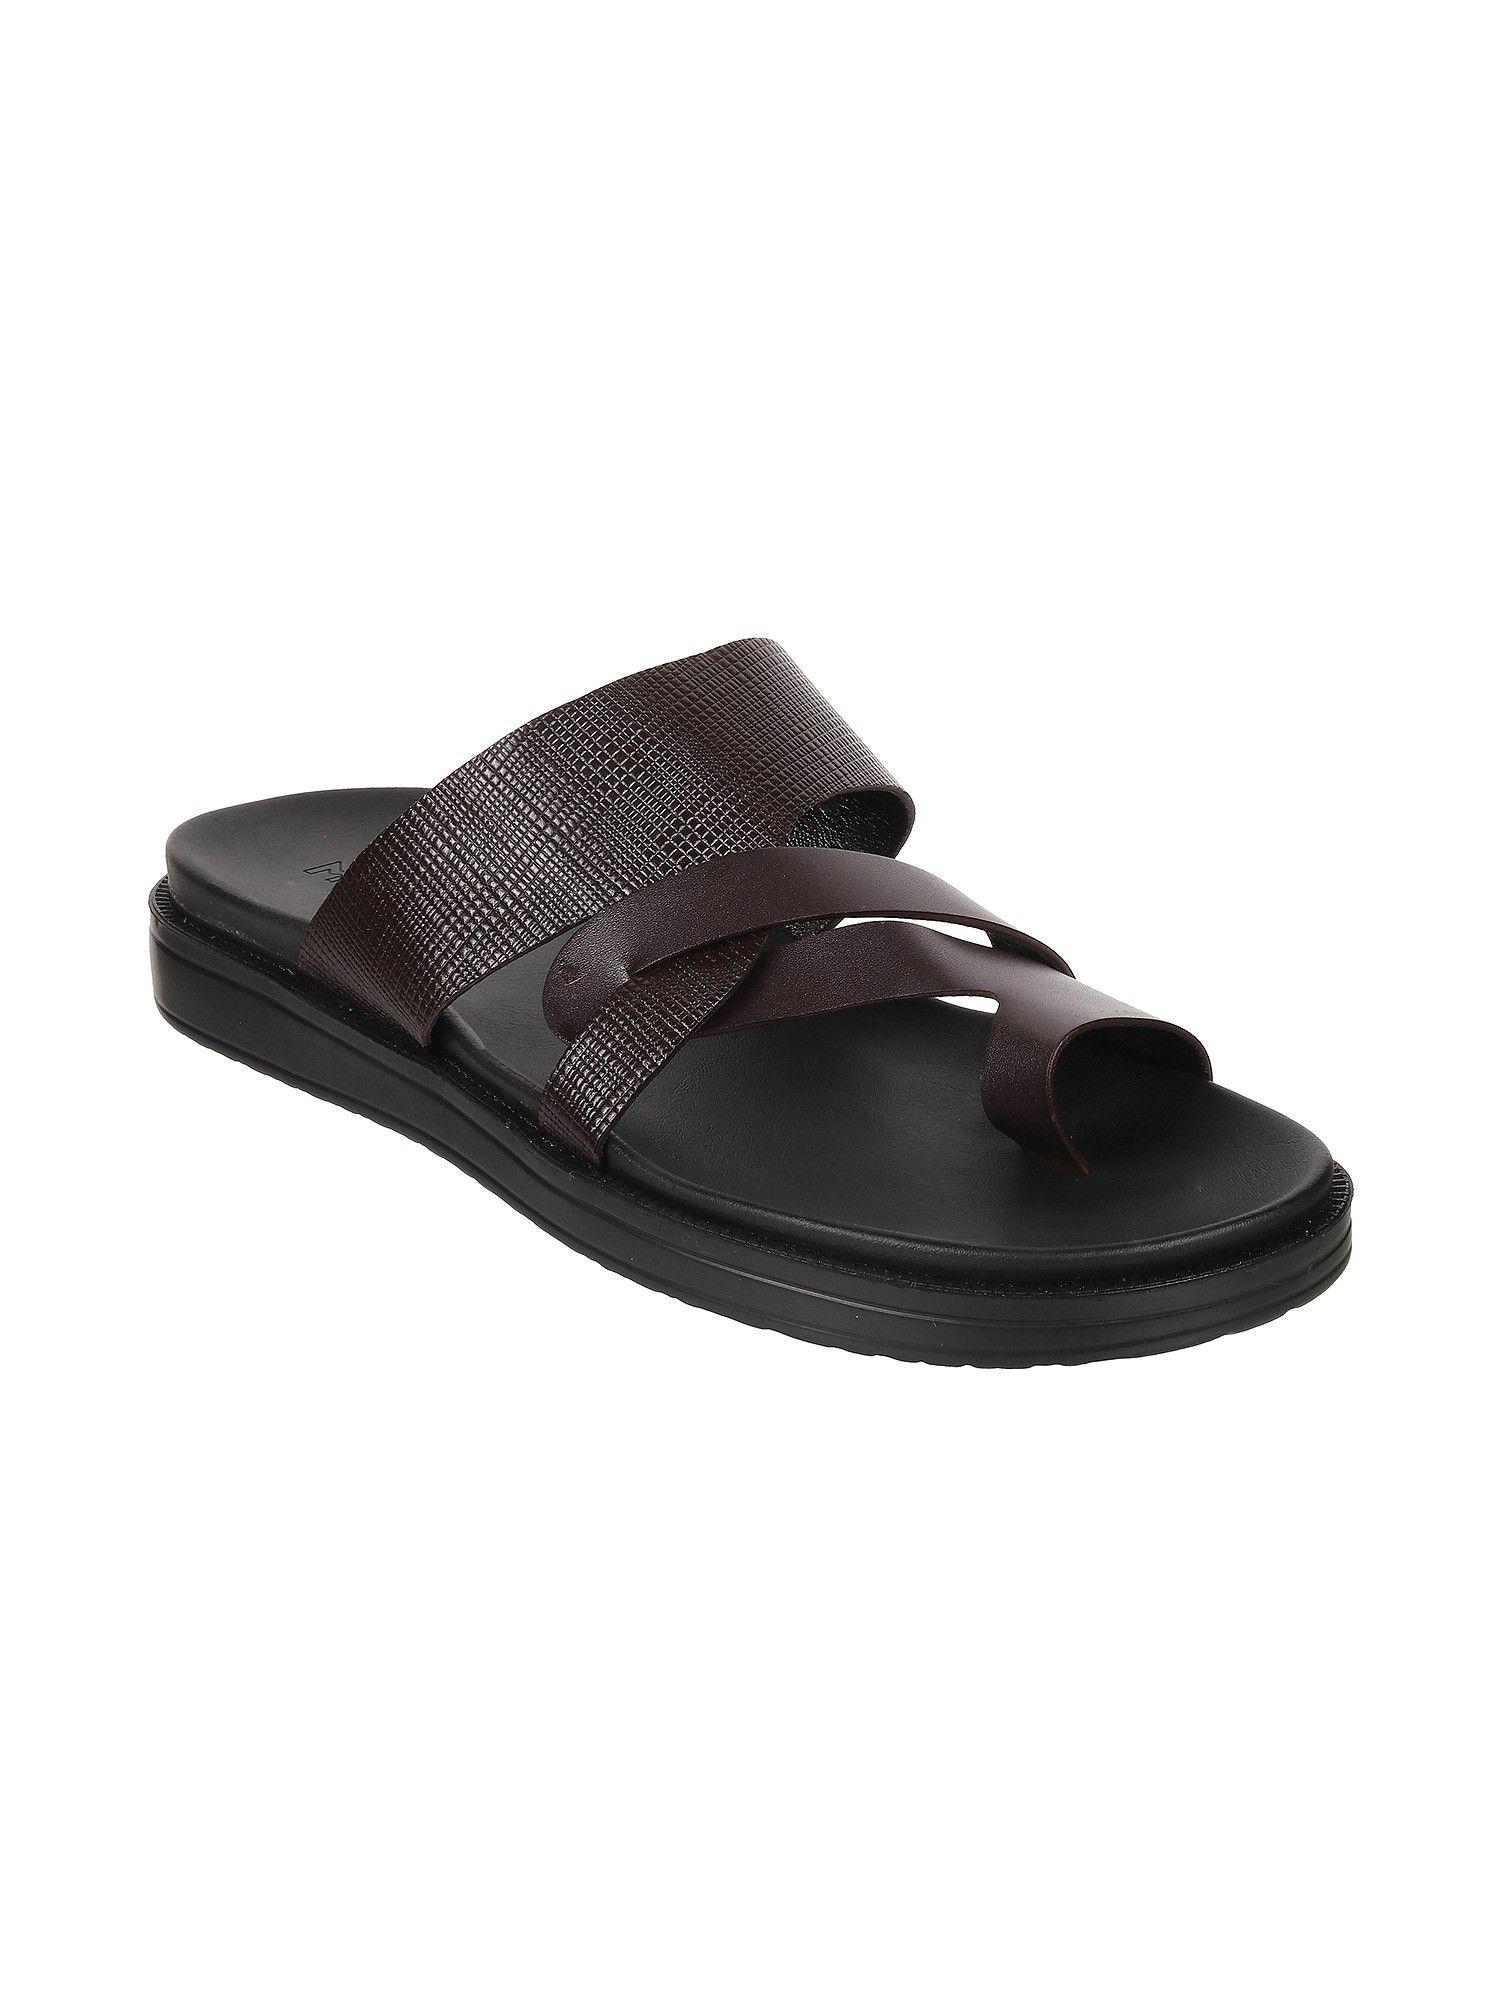 mens-brown-flat-chappalsmochi-mens-brown-synthetic-textured-sandals